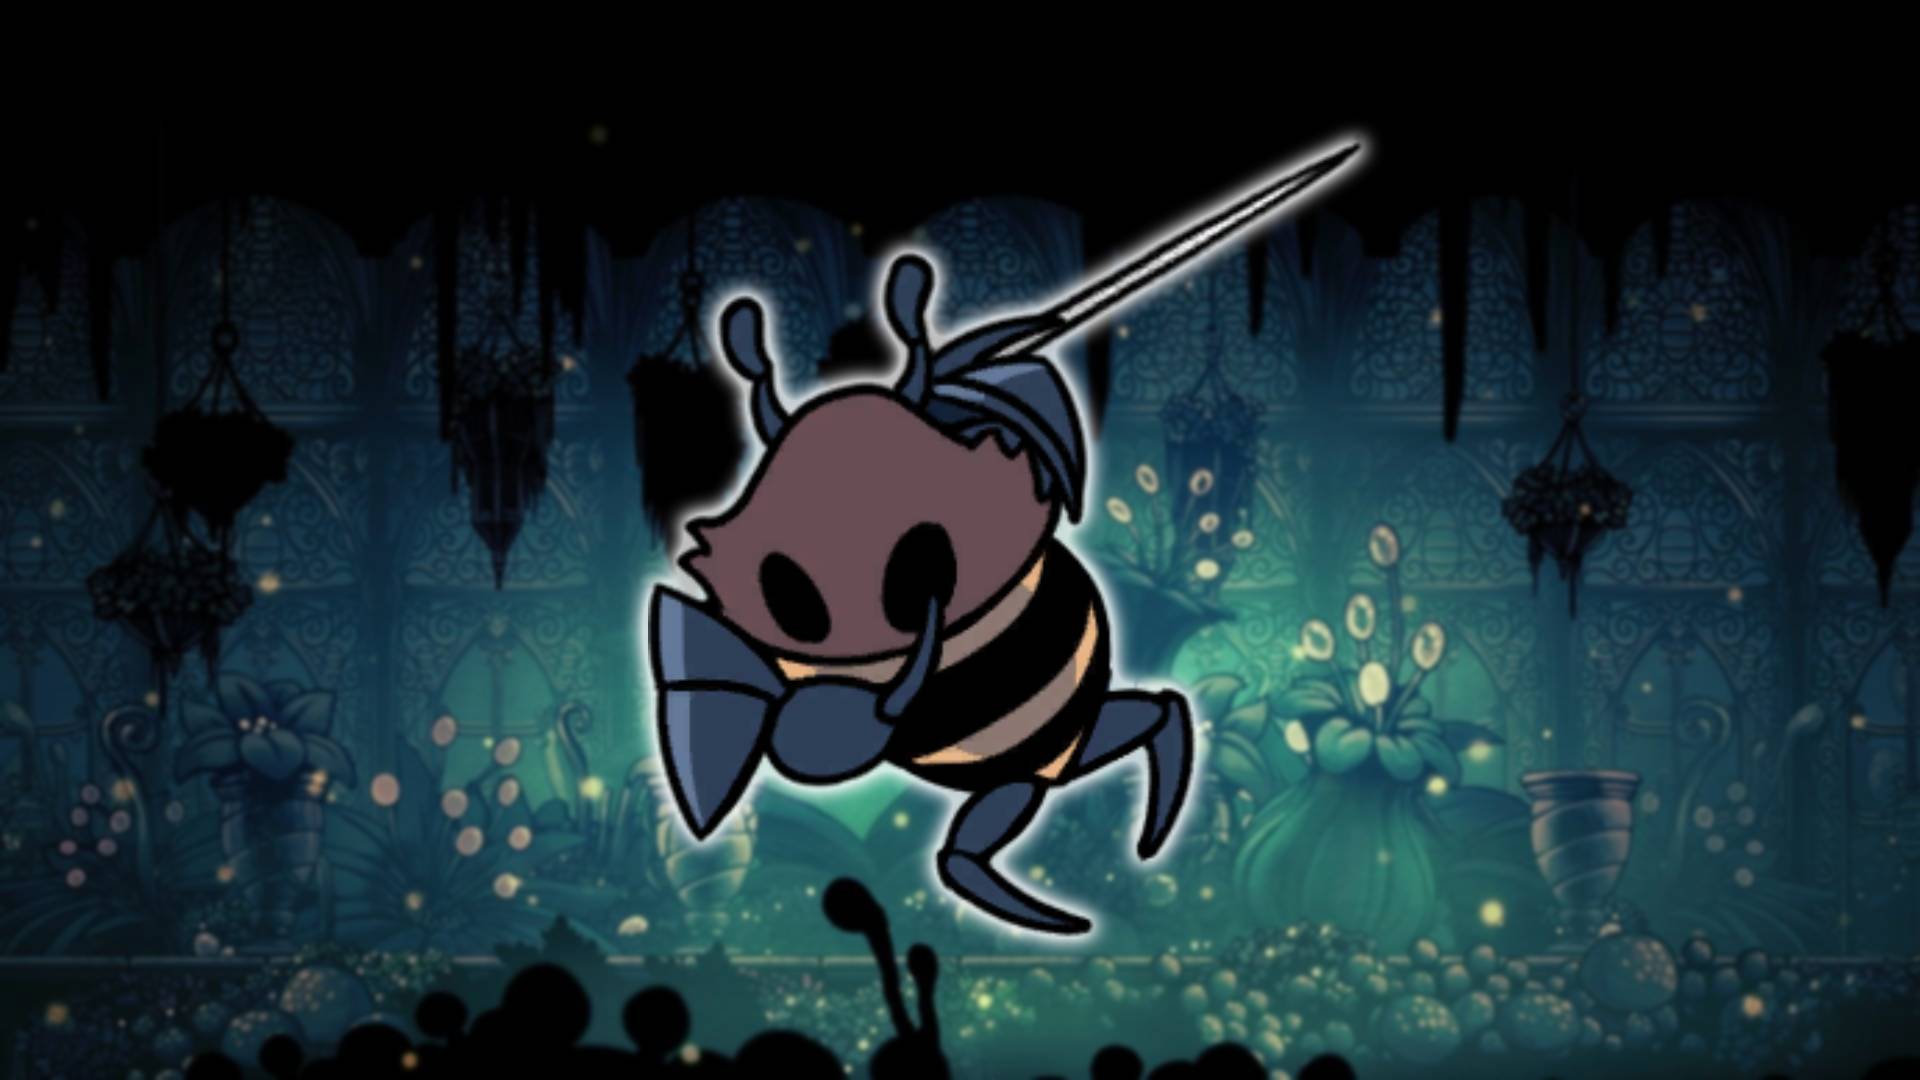 Hive Knight - the Hollow Knight boss, is visible against a mossy green background area from Hollow Knight 